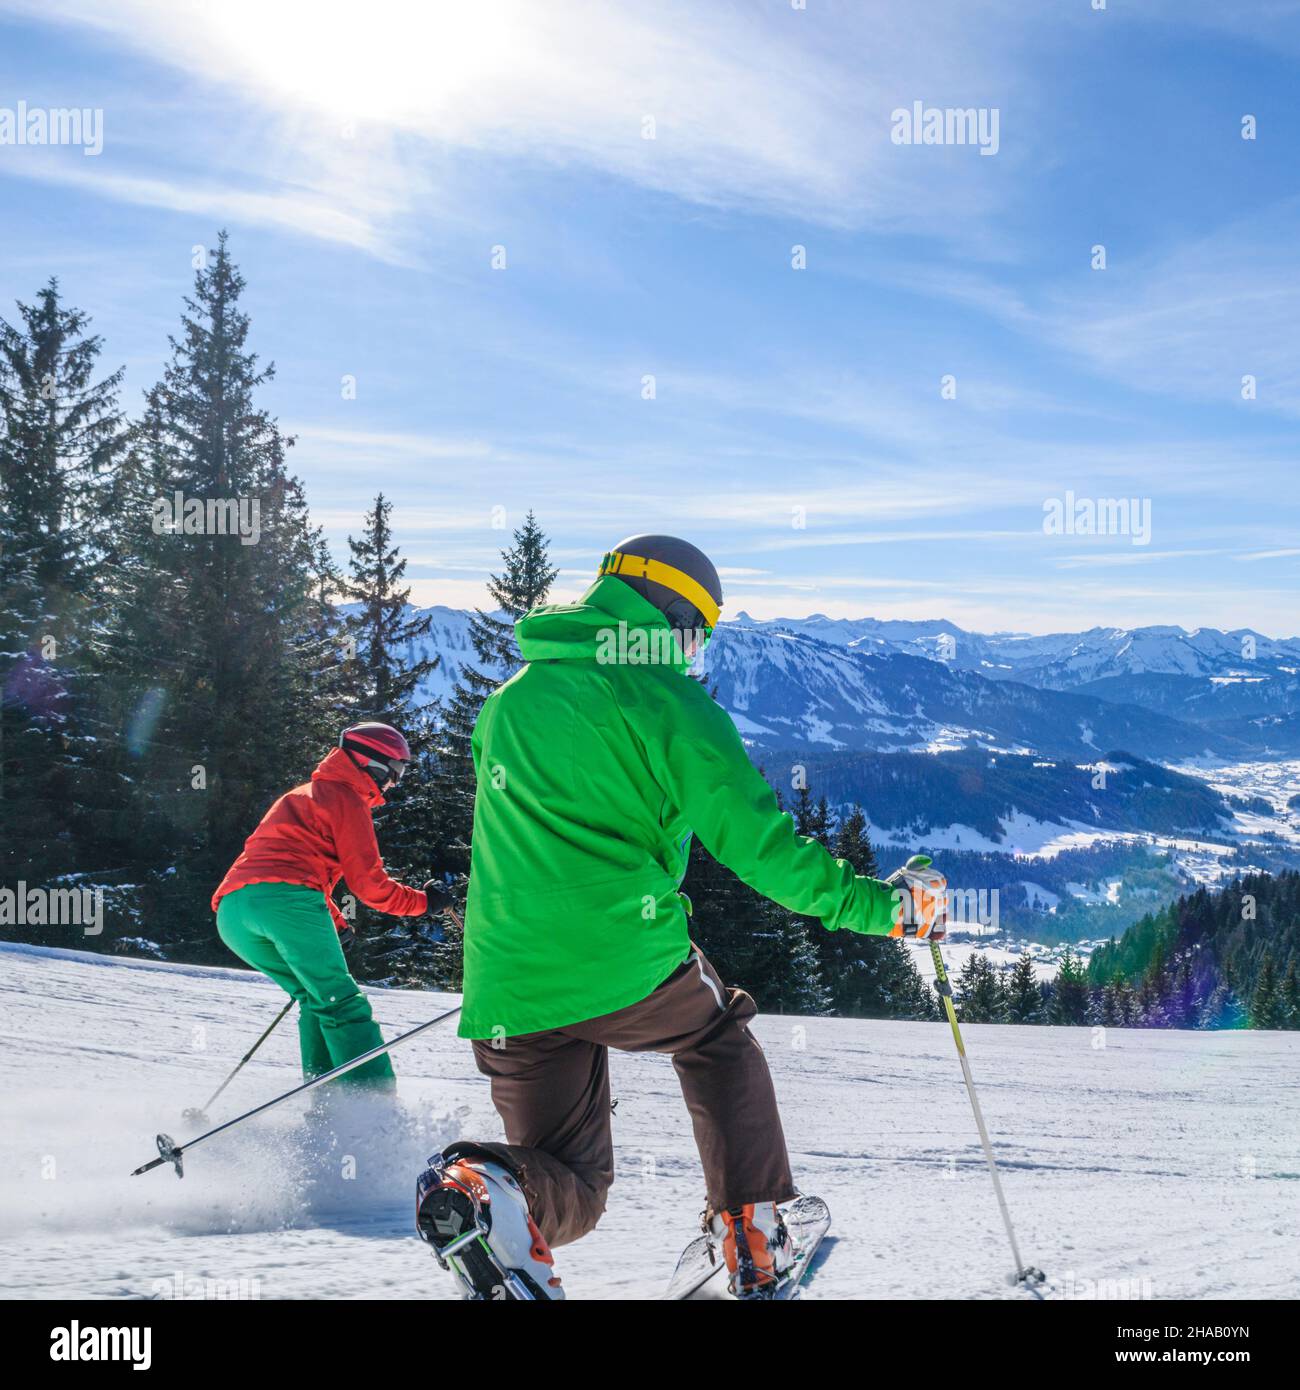 Young people skiing together on well prepared slope Stock Photo